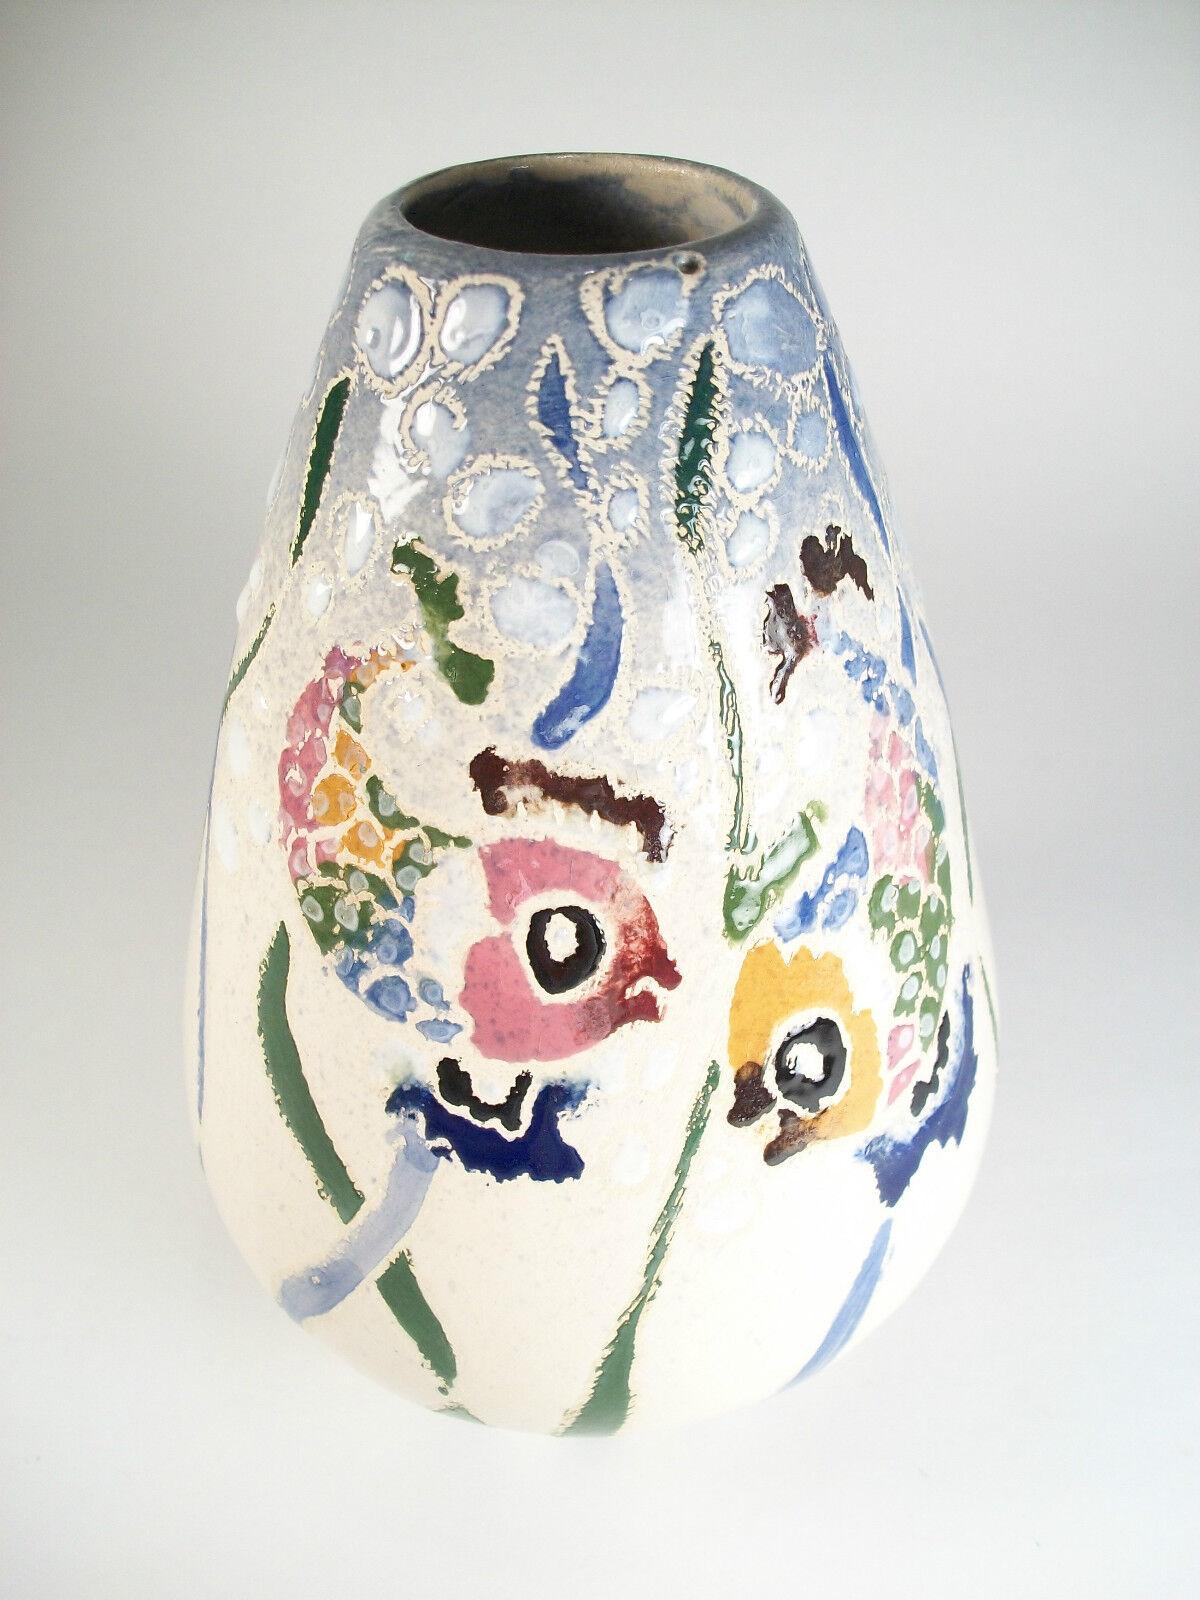 Vintage Studio Pottery Vase - Hand Painted - Unsigned - Mid 20th Century For Sale 2